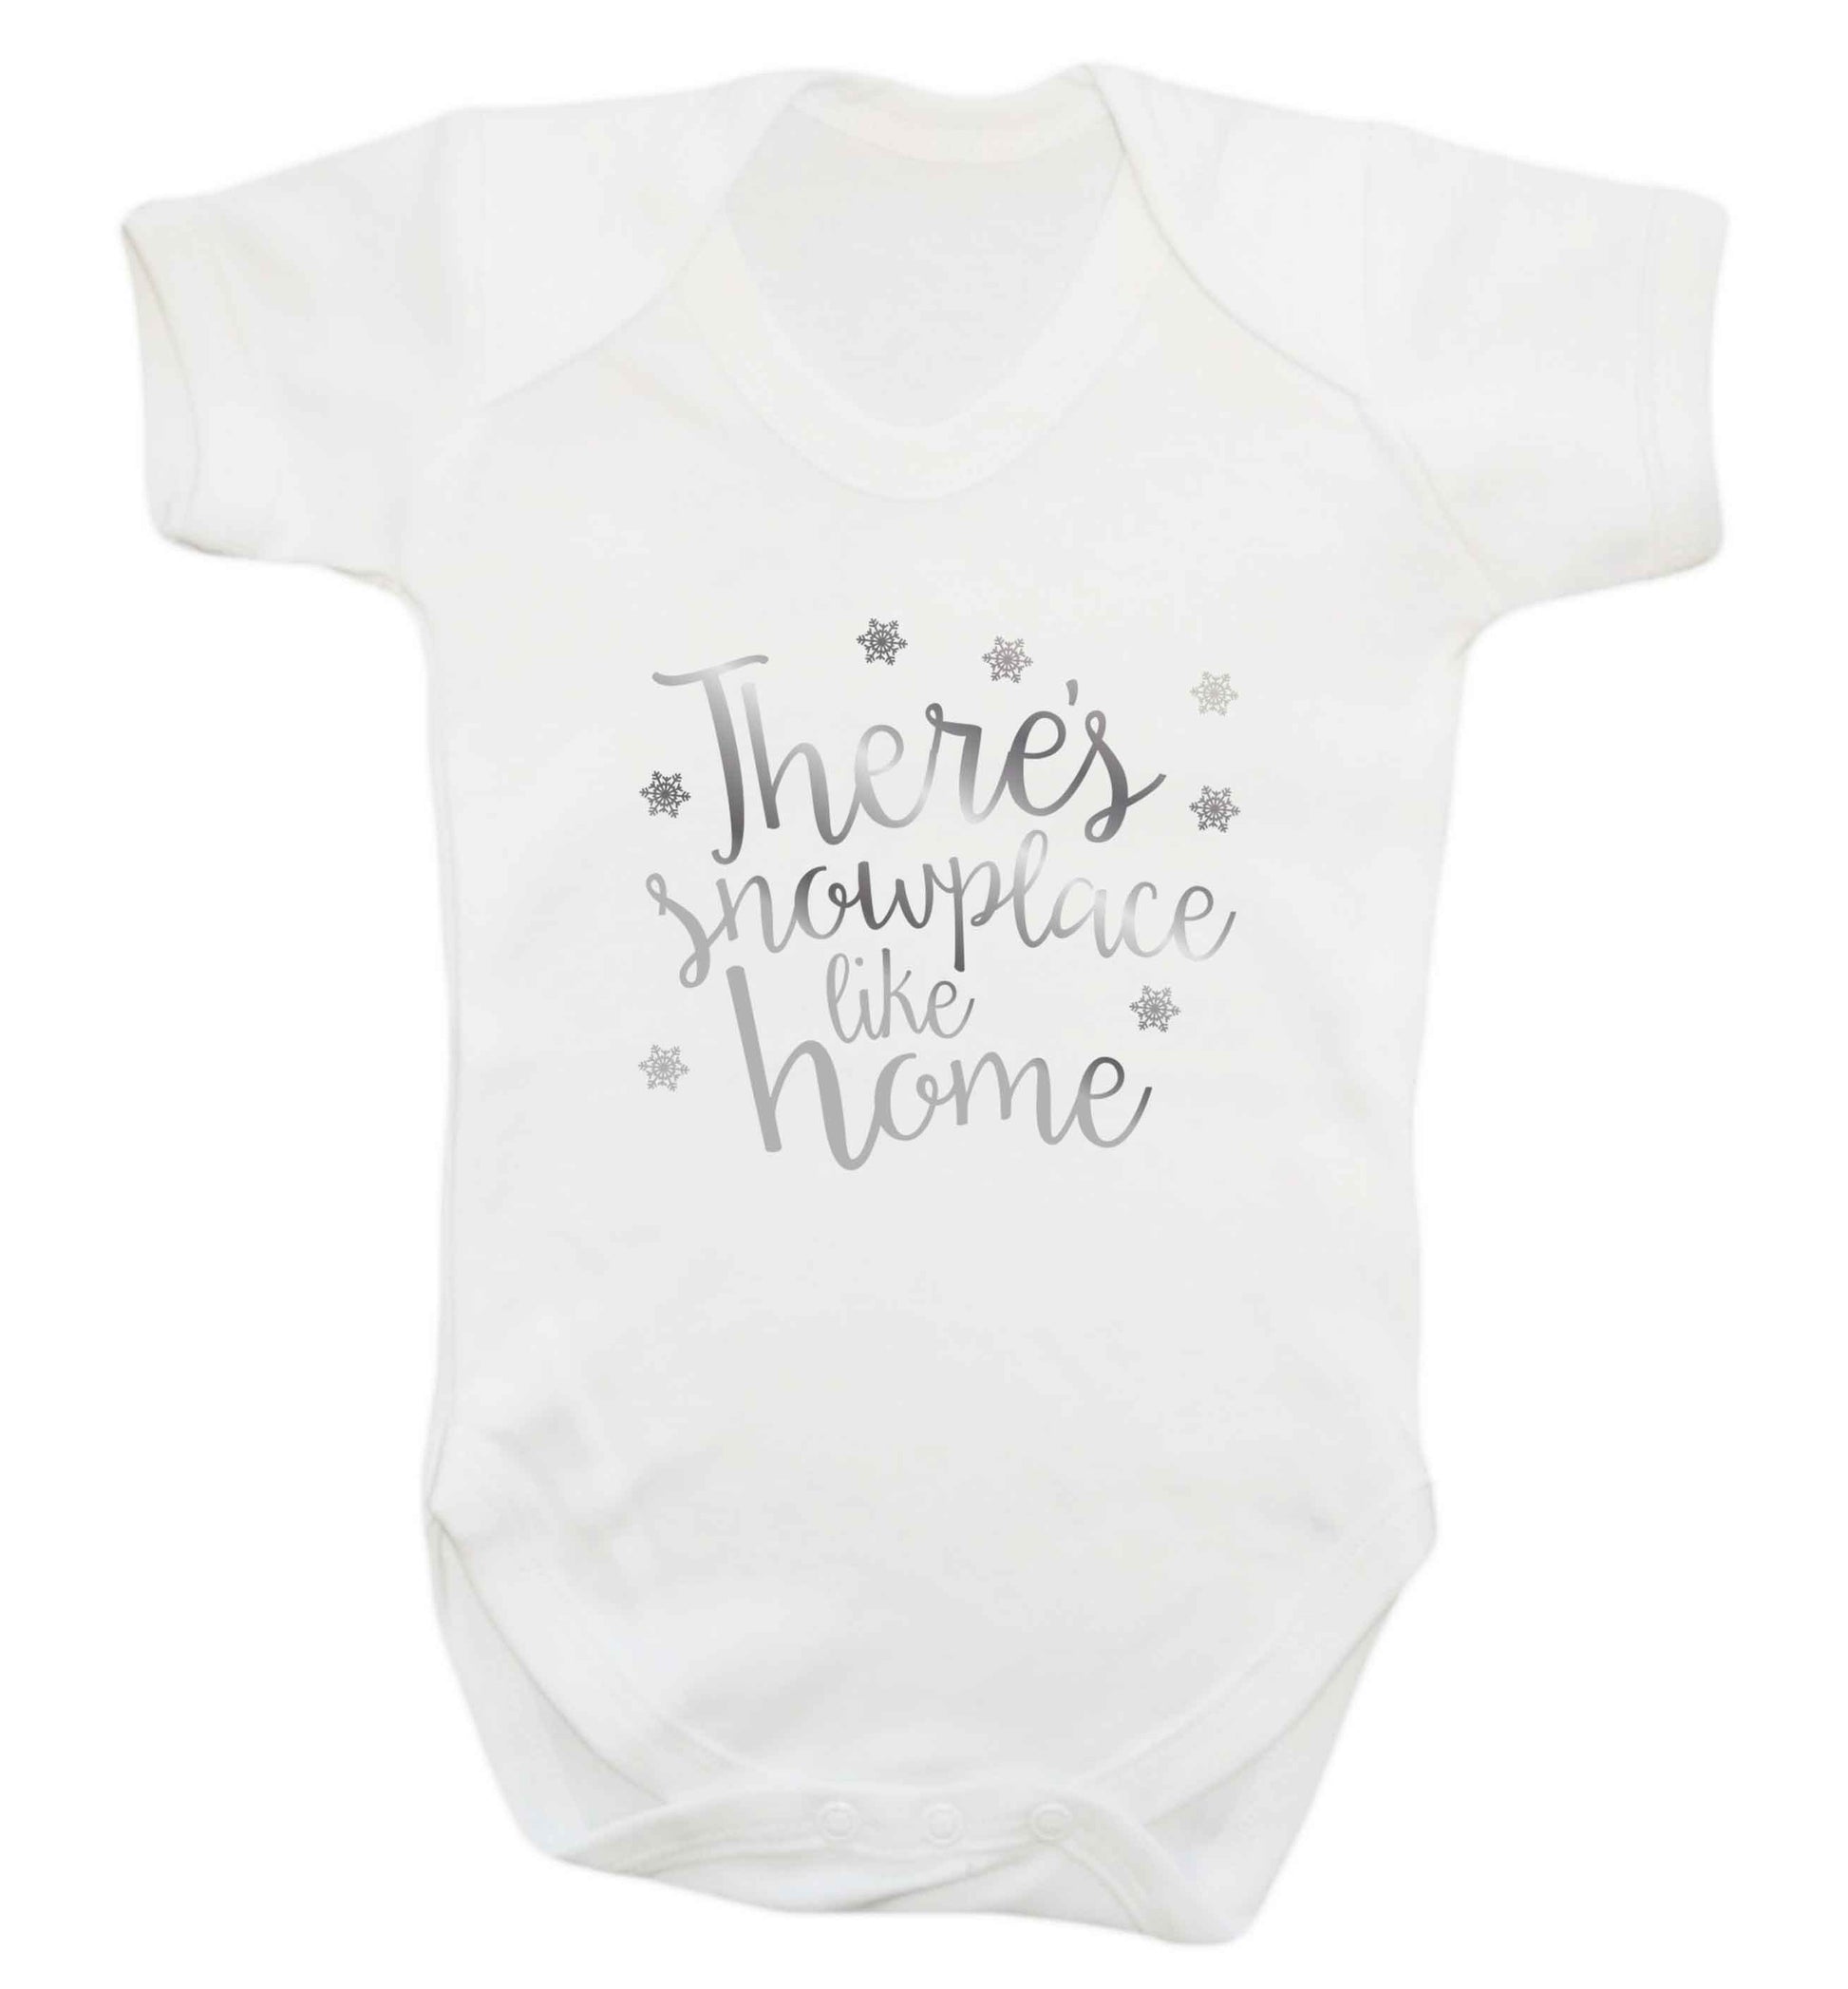 There's snowplace like home - metallic silver baby vest white 18-24 months